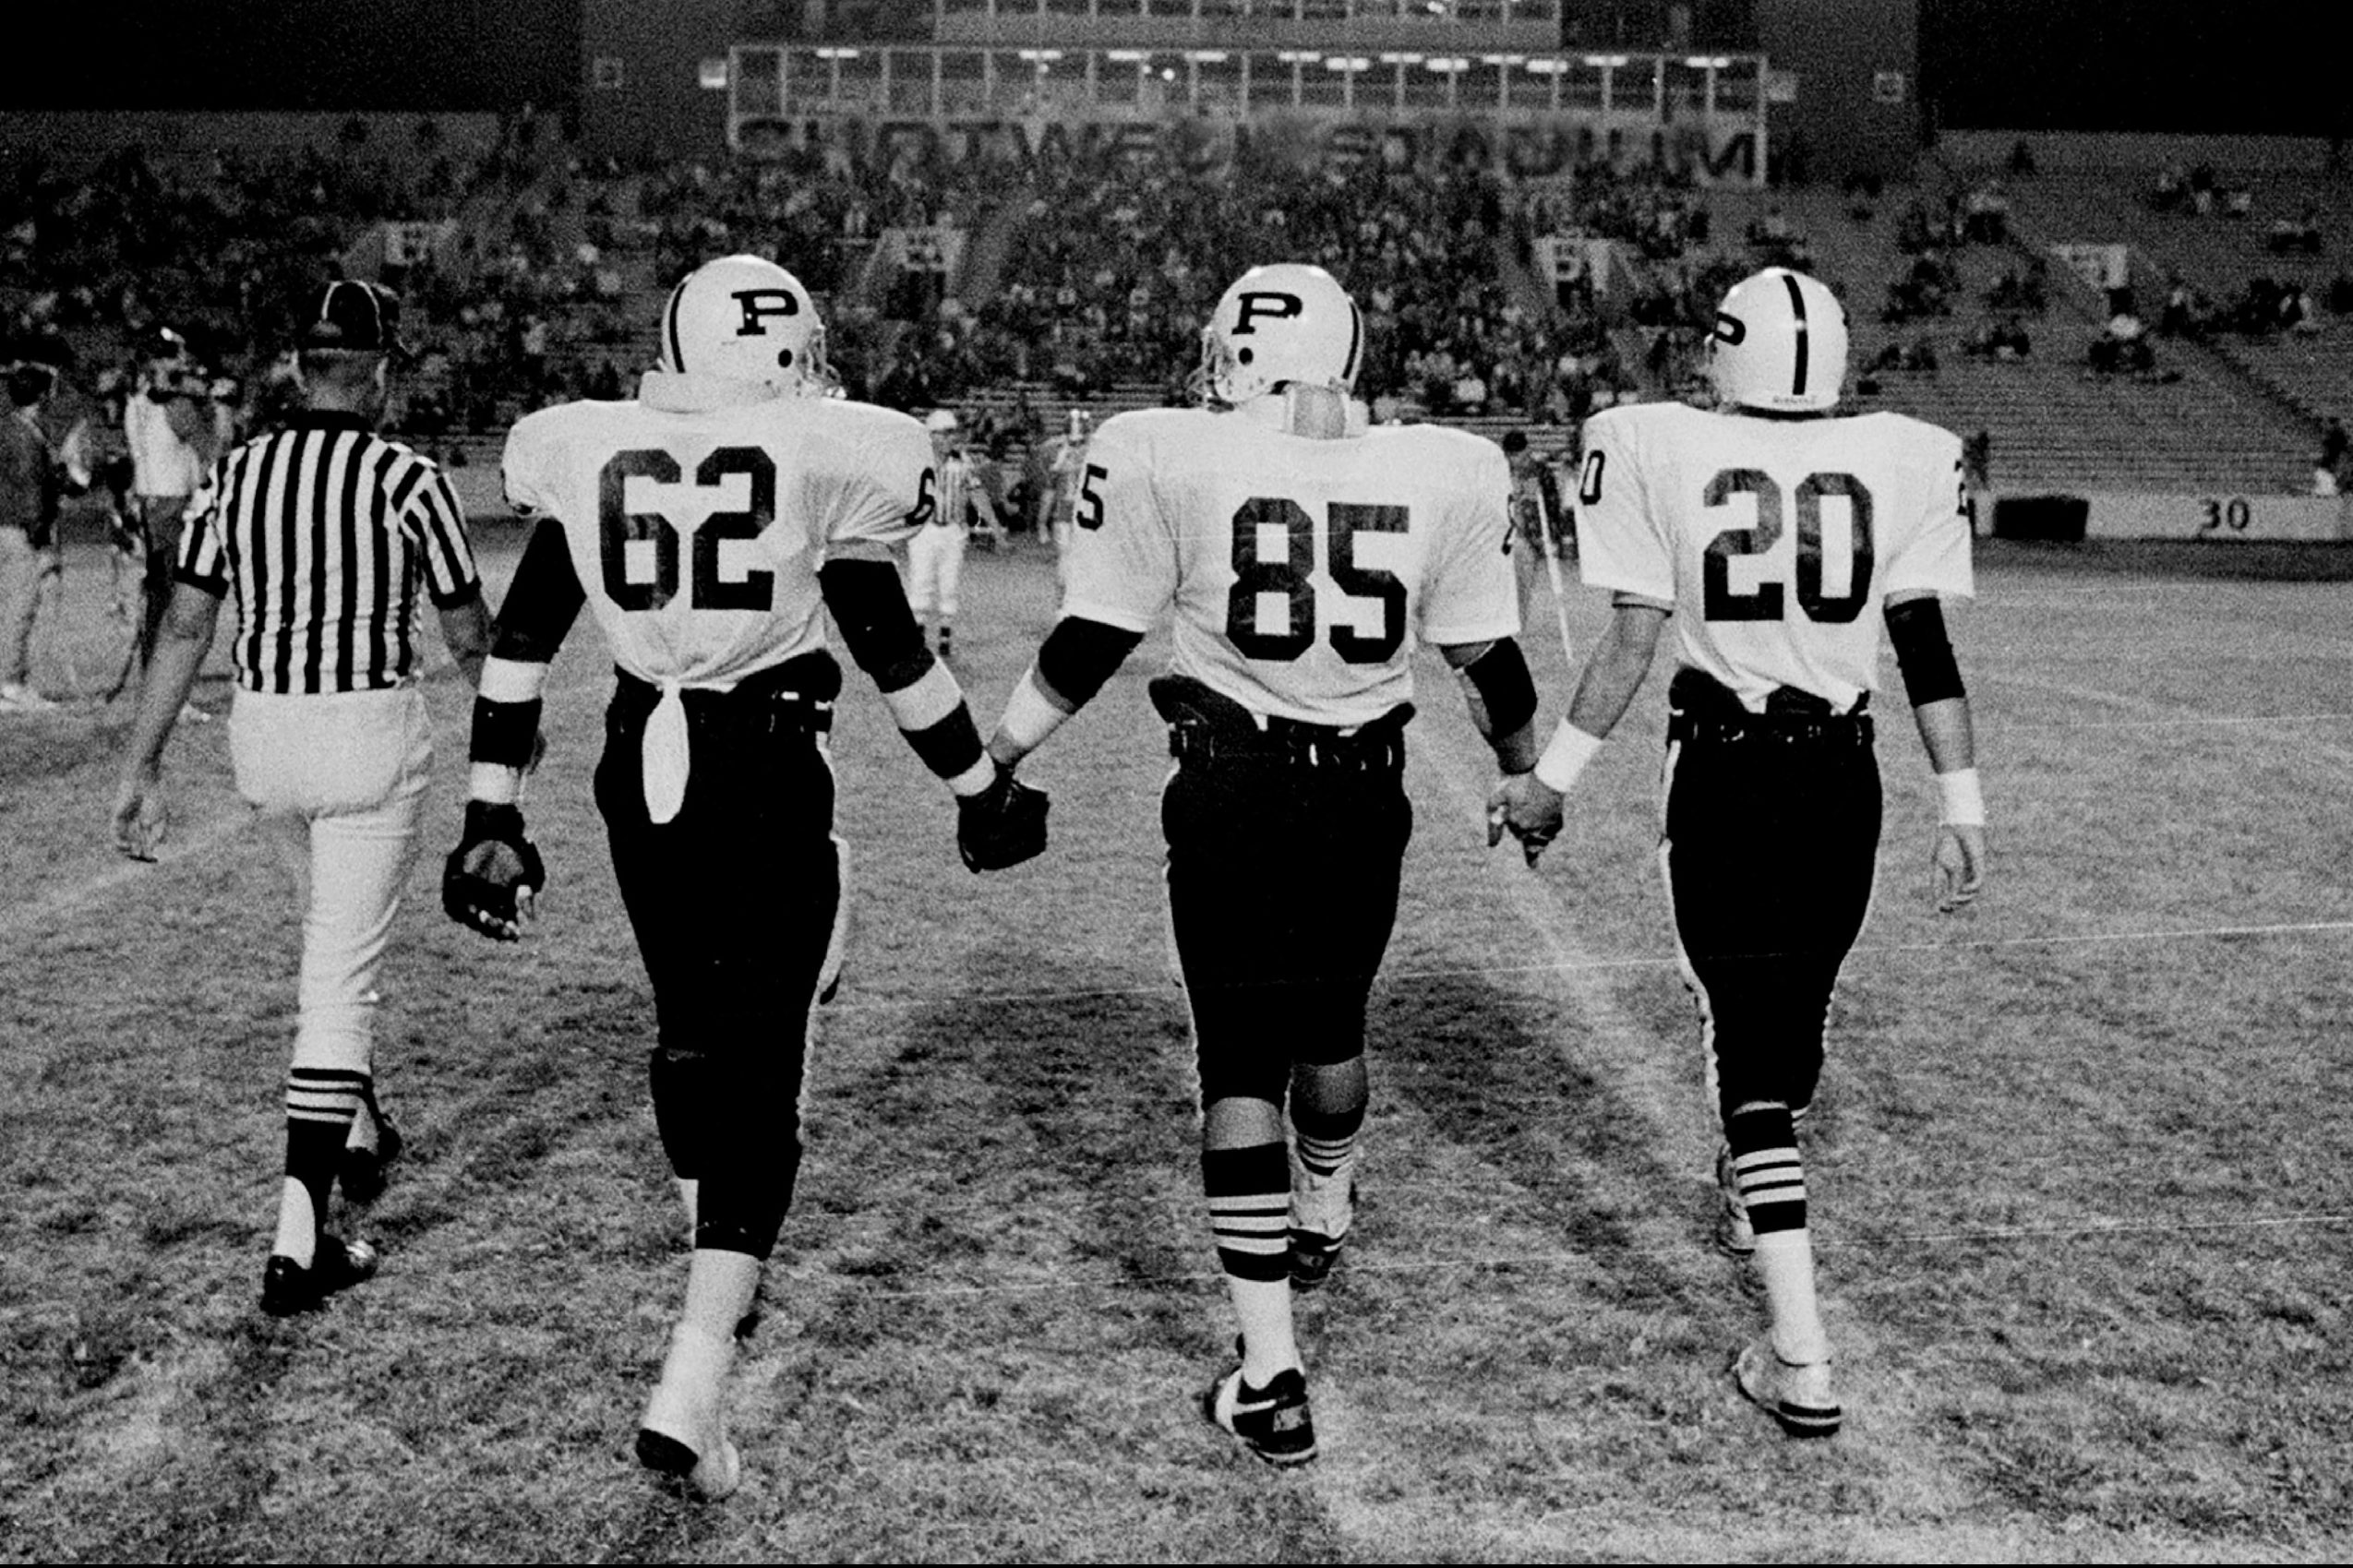 An Unprecedented Look at the High-School Football Team That Inspired “Friday Night Lights”